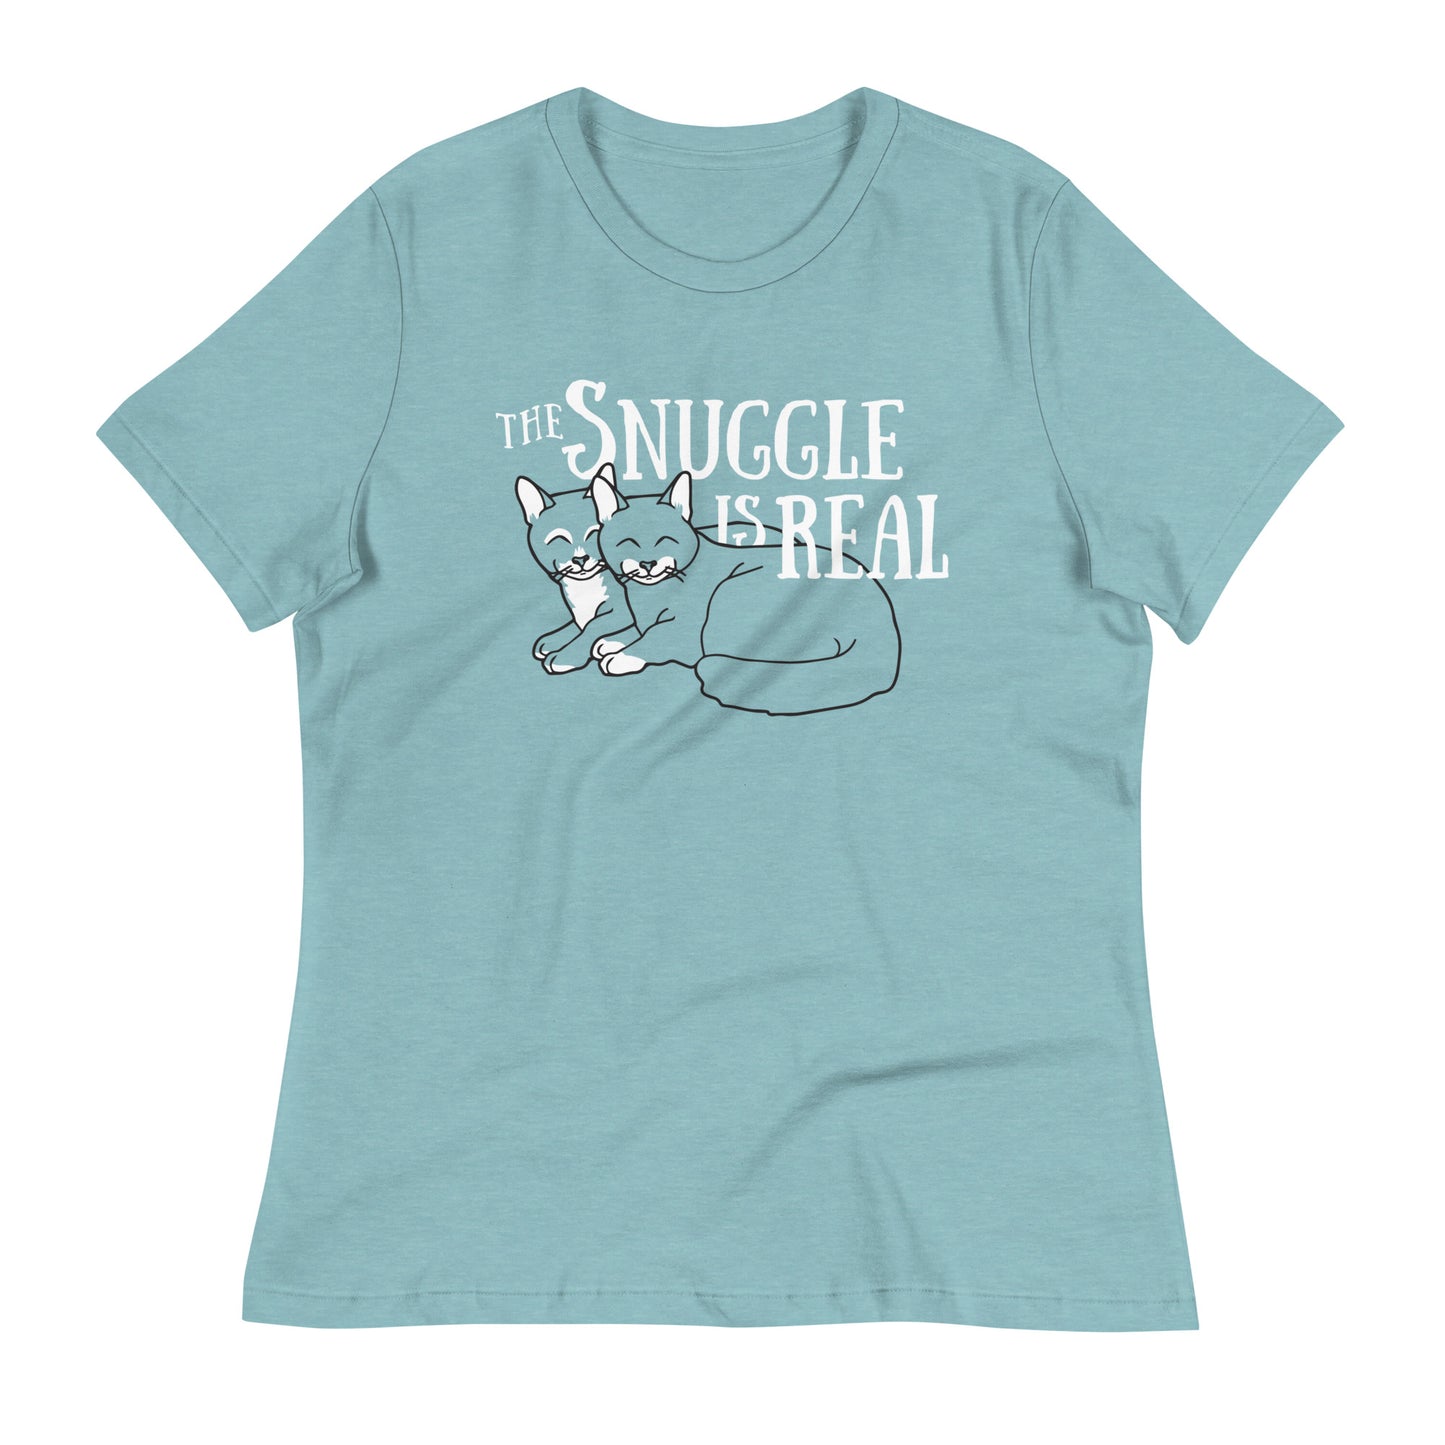 The Snuggle Is Real Women's Signature Tee